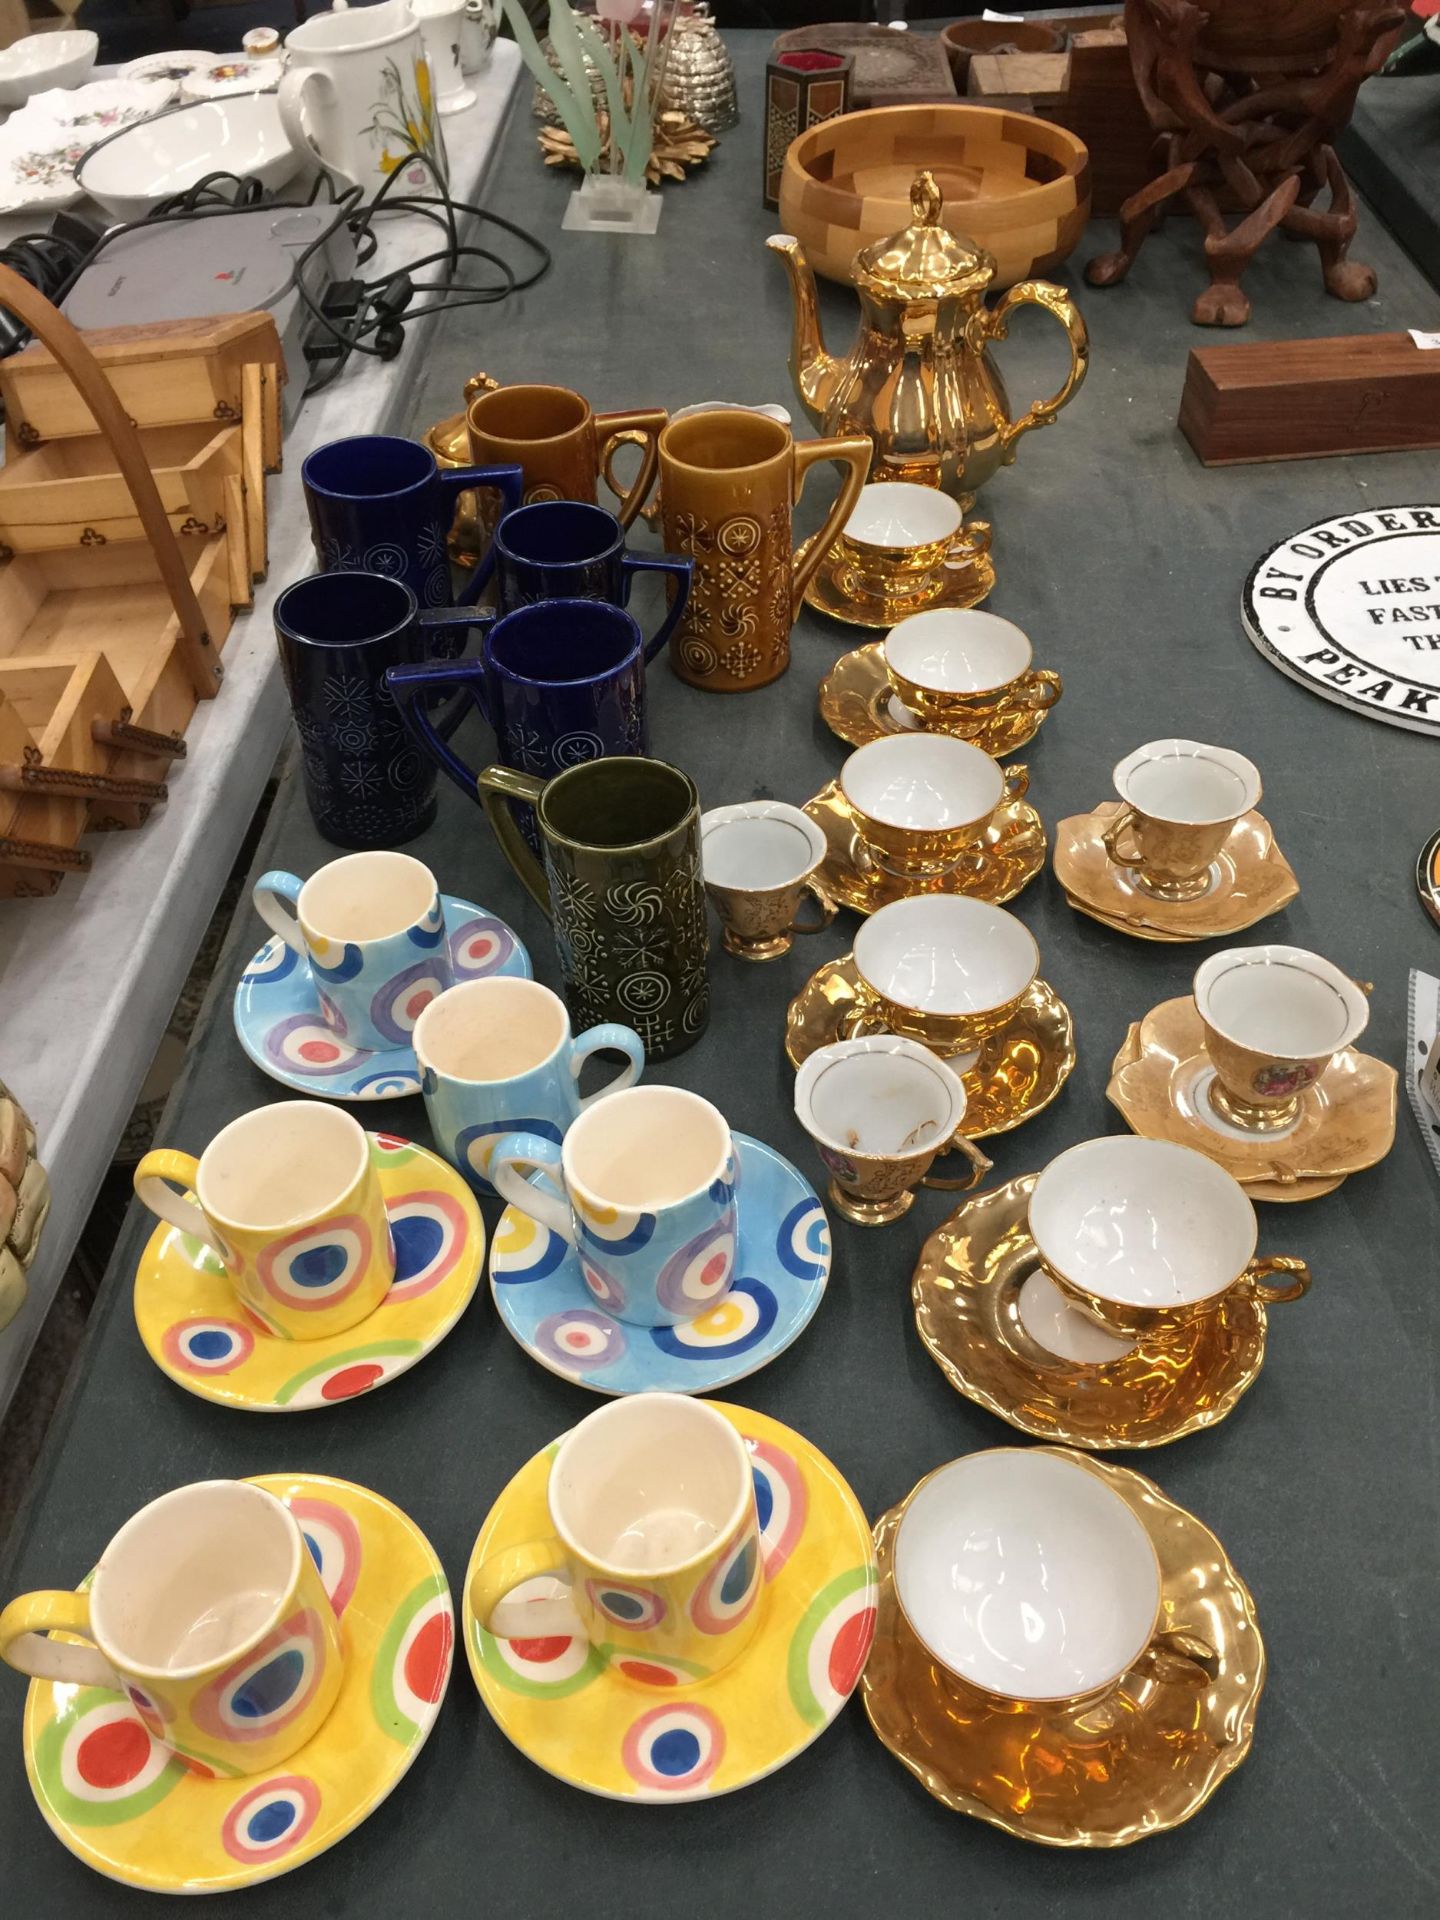 A GOLD COLOURED TEASET TO INCLUDE A TEAPOT, SUGAR BOWL, CREAM JUG, CUPS AND SAUCERS, PORTMEIRION '